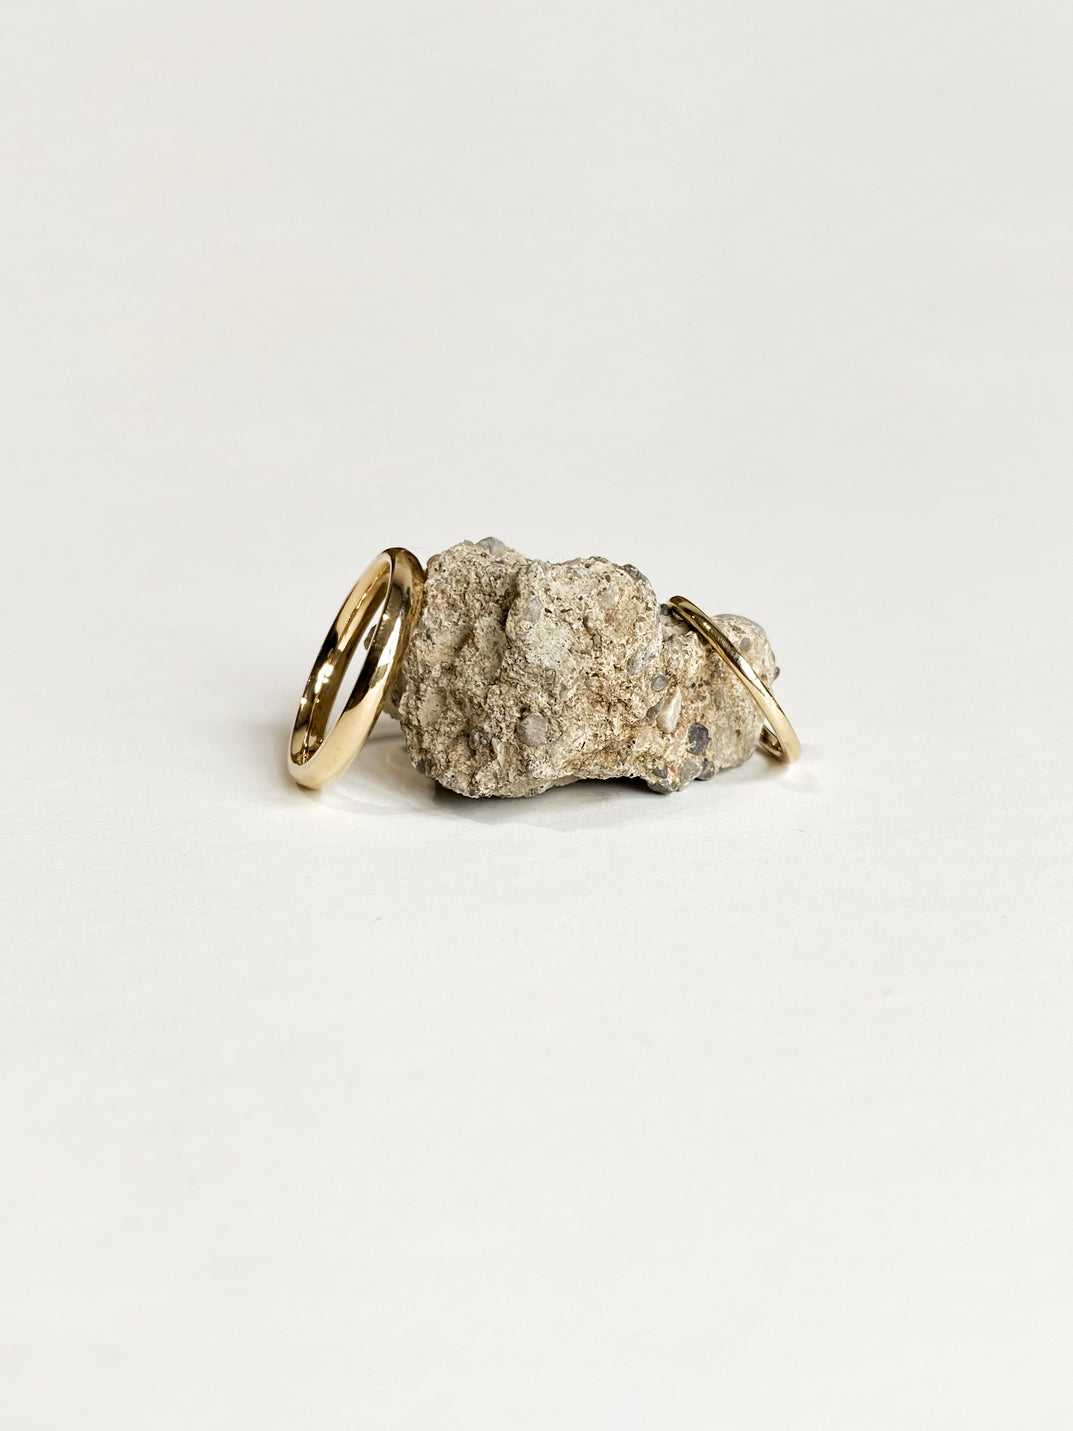 2 classic yellow gold wedding rings leaning against beige rock on white background